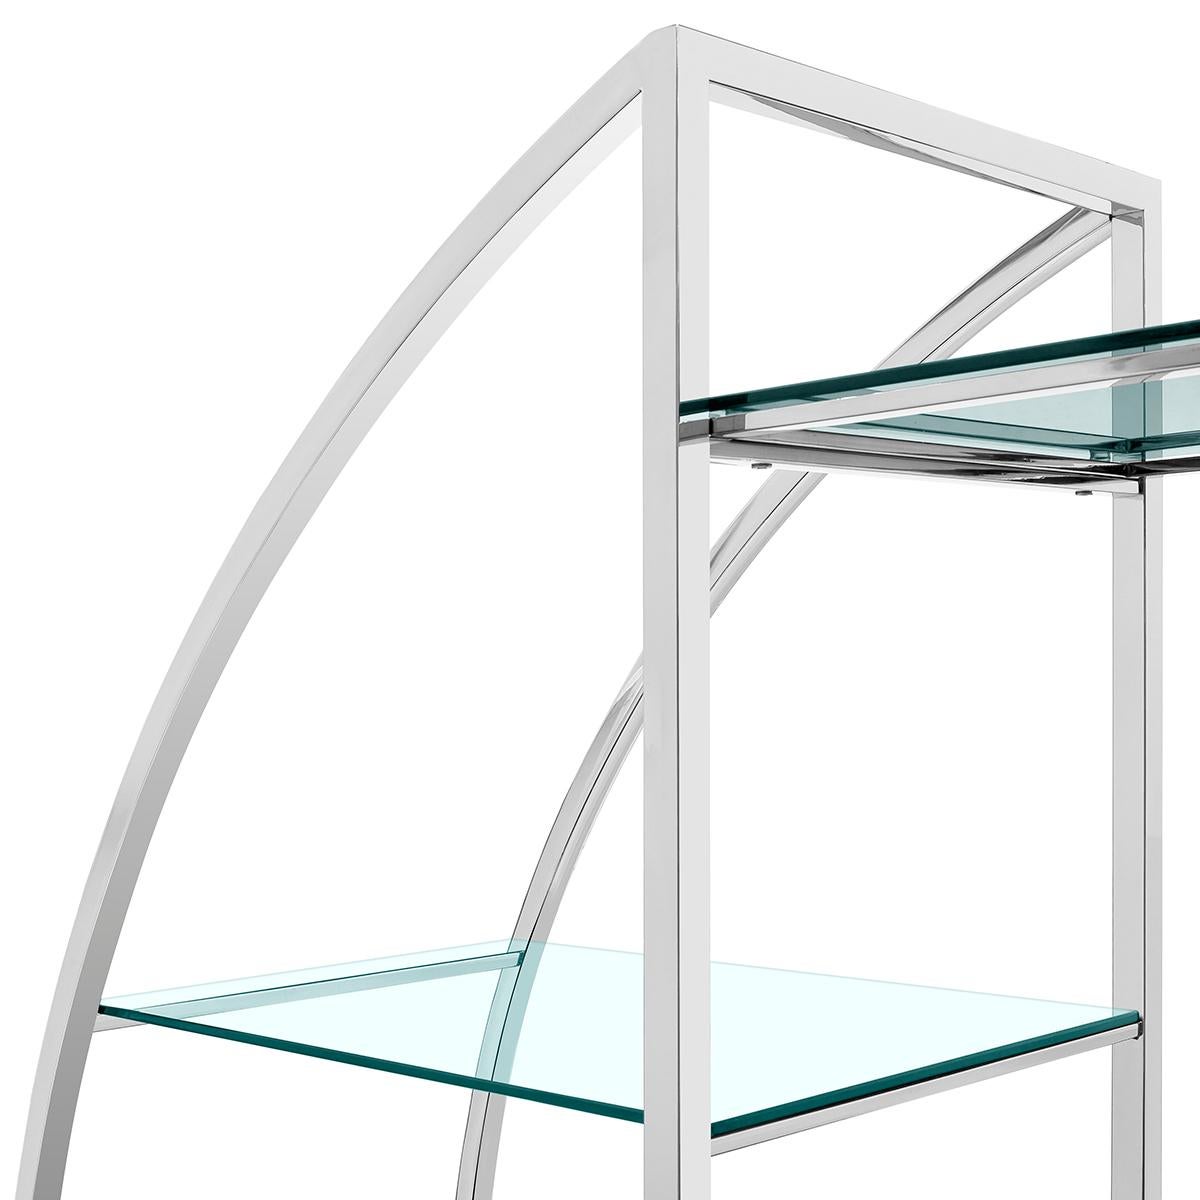 Exclusive chrome Omega shelf from Abhika Mod. Austin-Shelf

Chrome shelf in timeless circular shape, consisting of chrome, metal and glass. 
Made in Italy.
Best workmanship in mint condition. Chrome shelving room divider in Art Deco style round